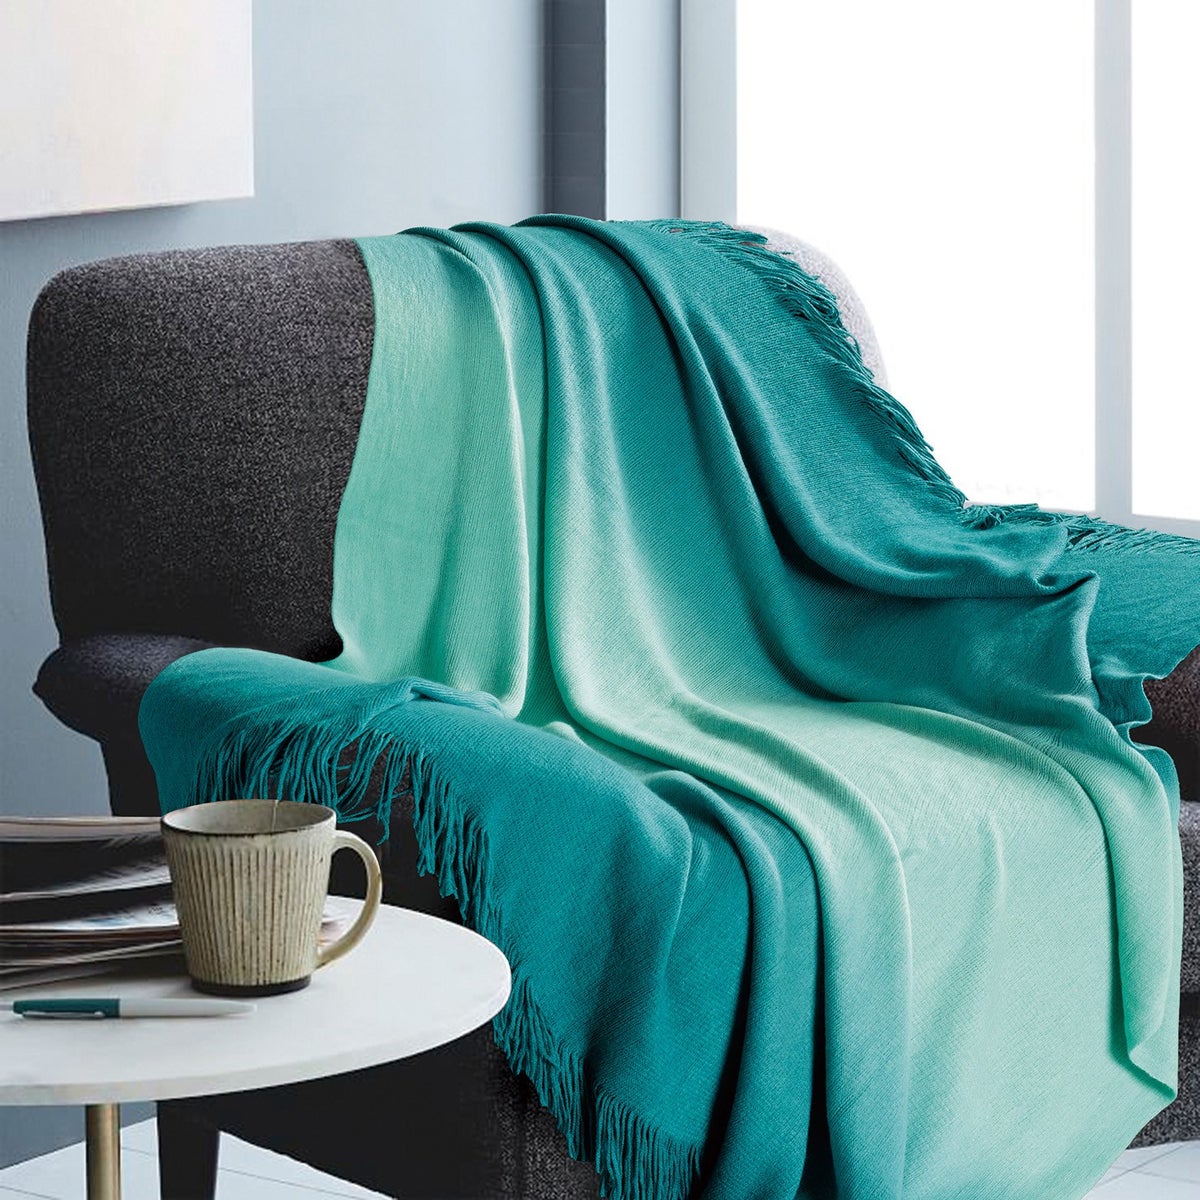 Ombre Teal Throw 50x60